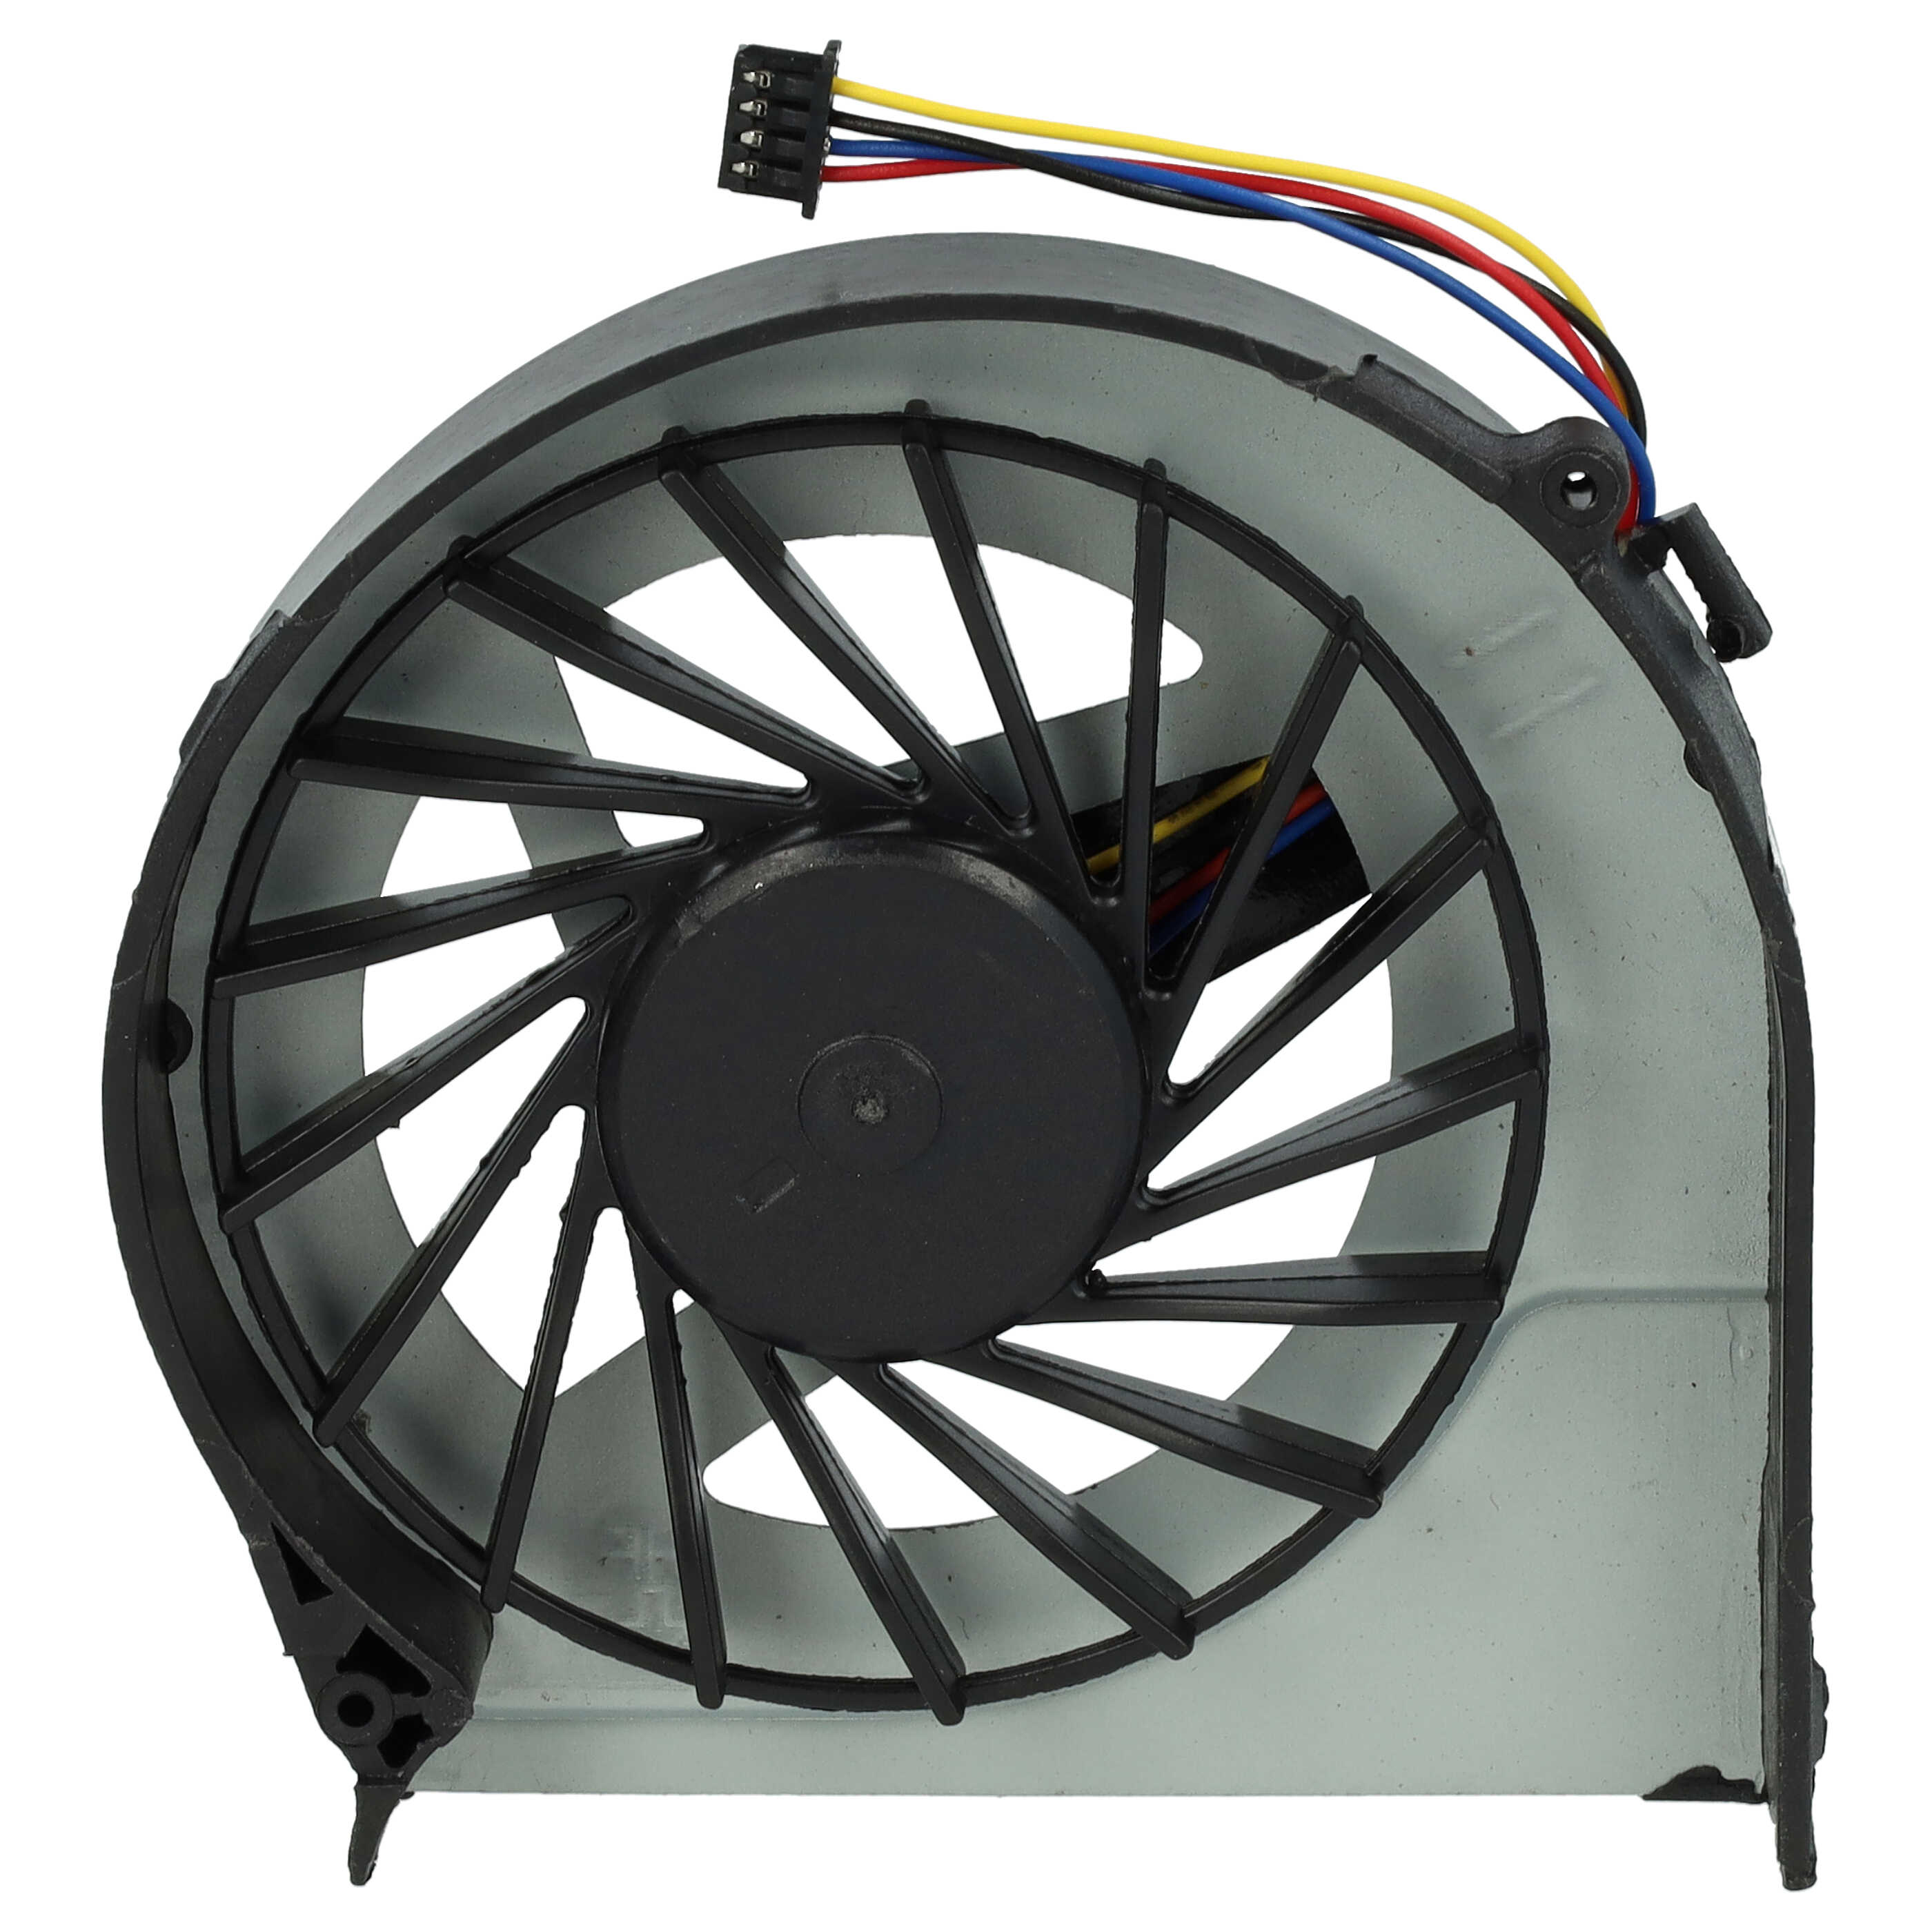 CPU / GPU Fan suitable for HP Pavilion G7 Notebook 69 x 67 x 12 mm